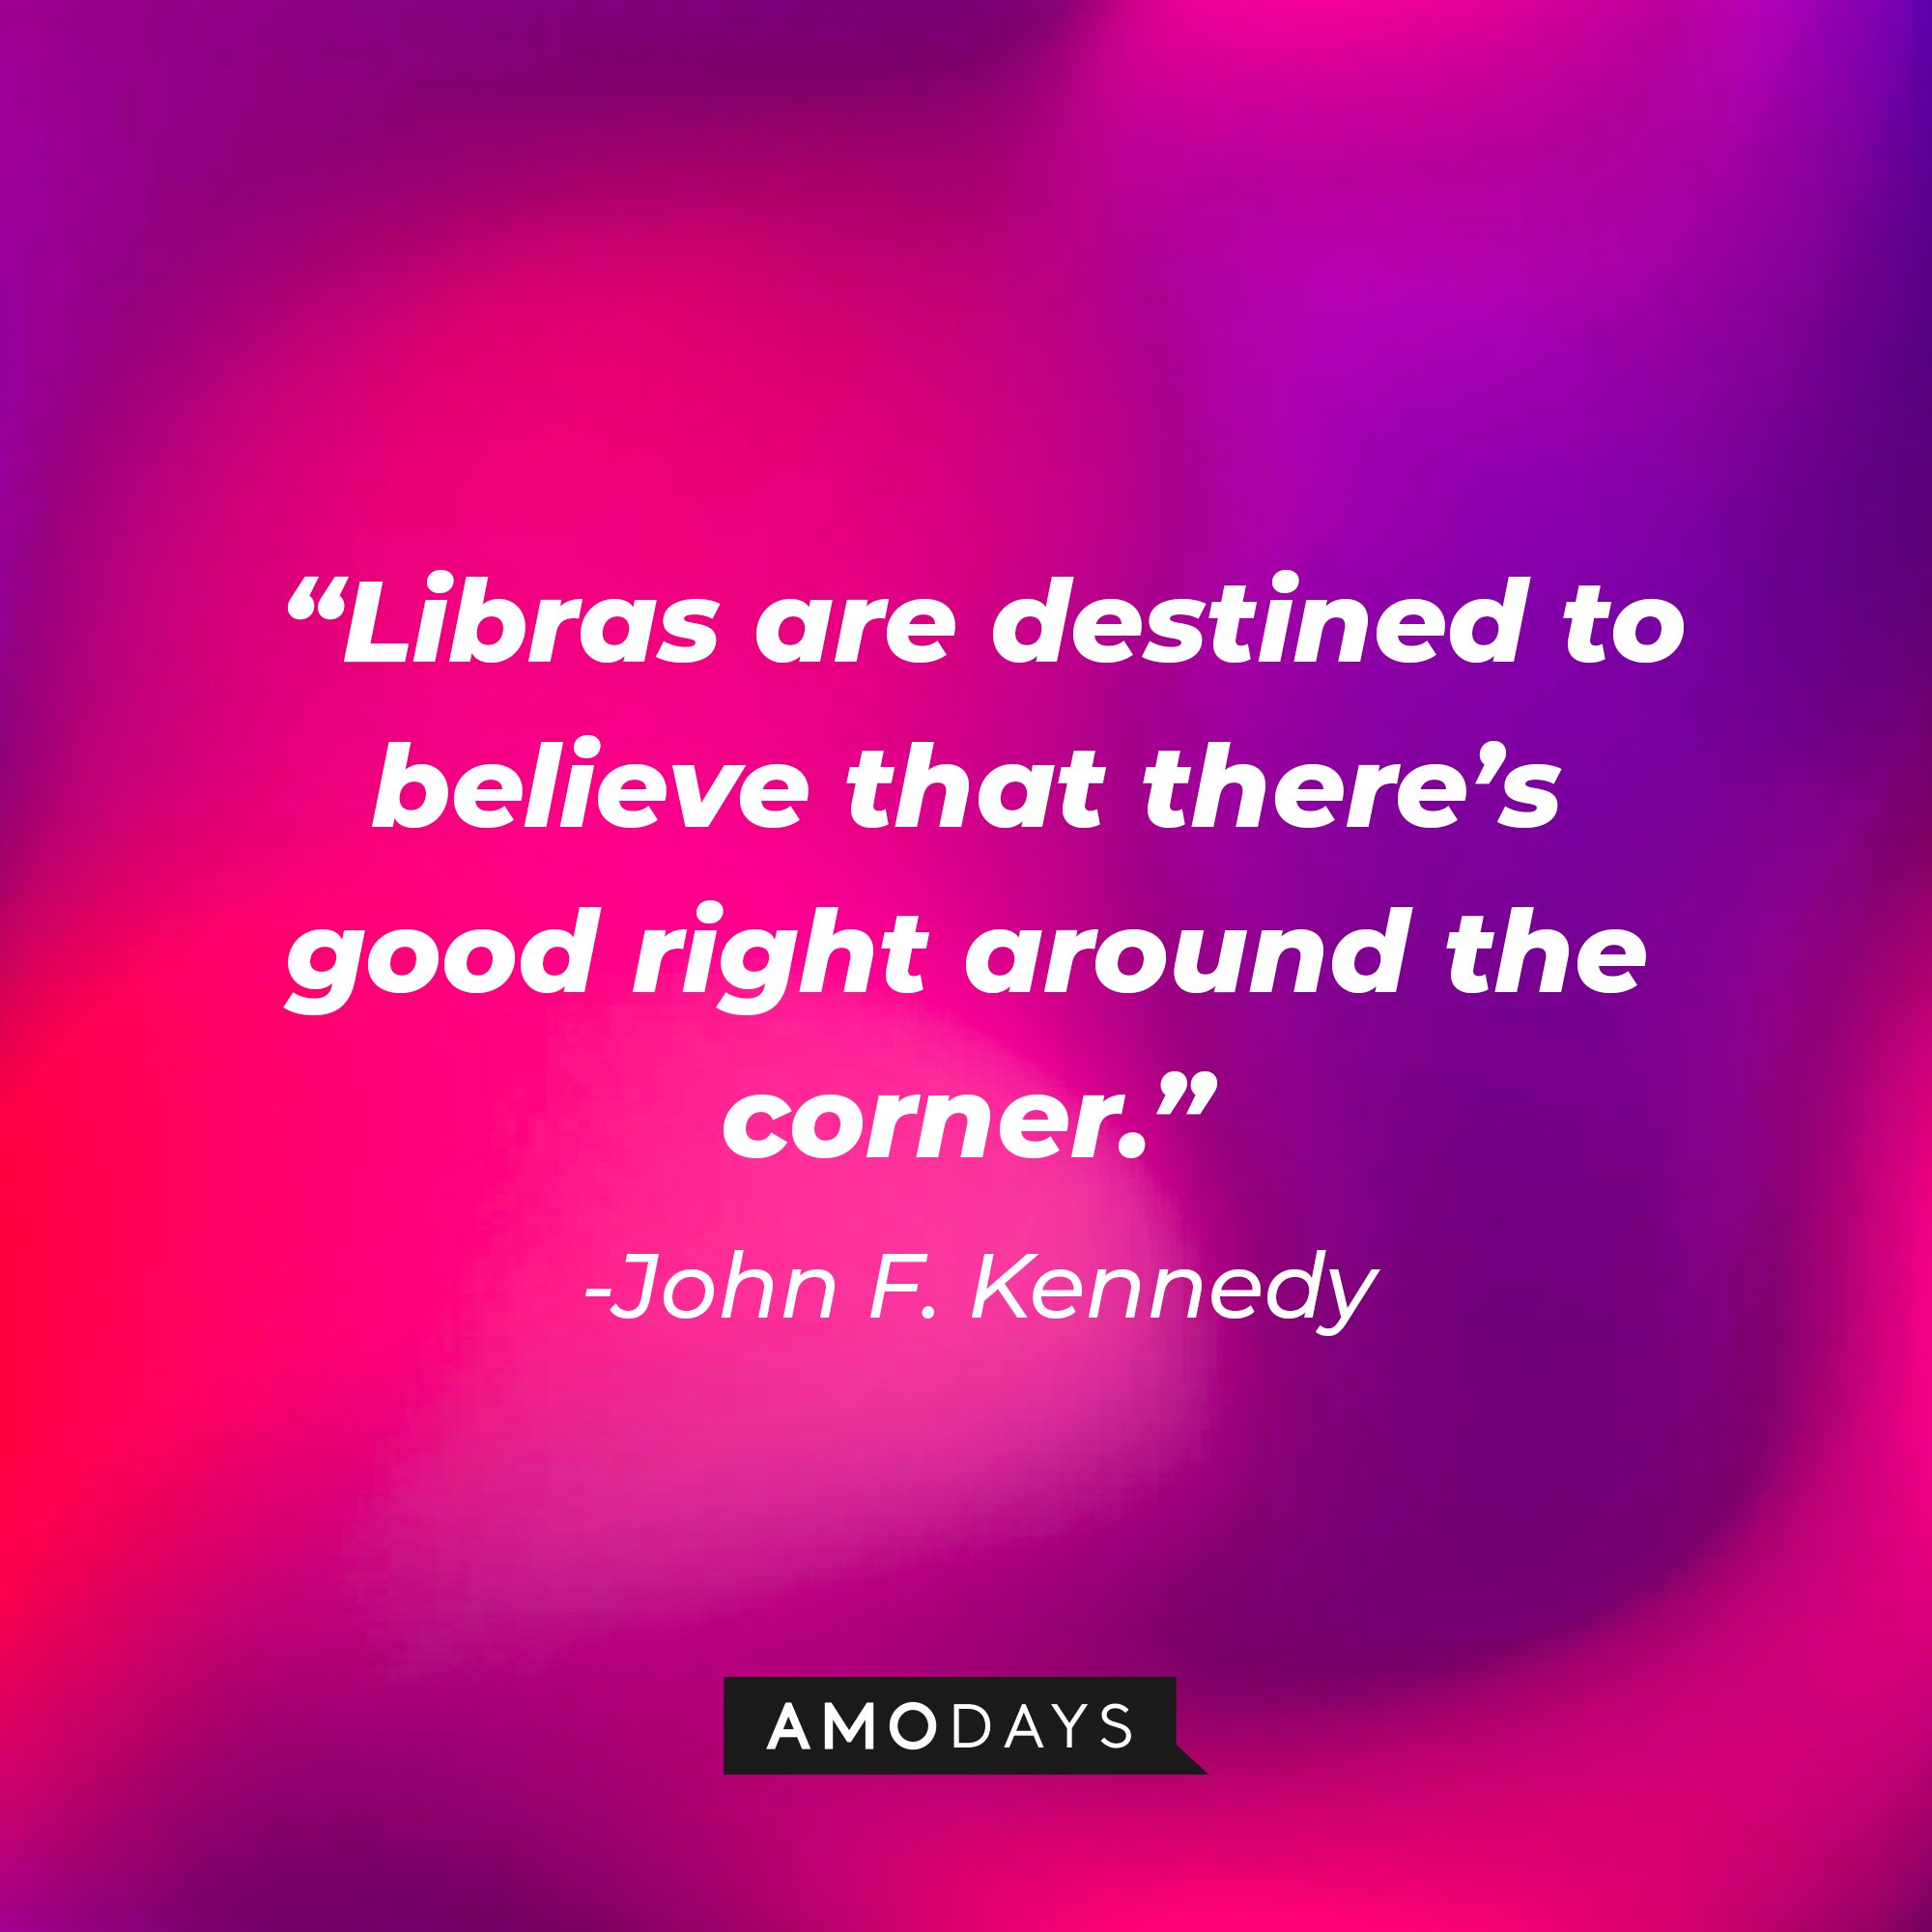 John F. Kennedy's quote: "Libras are destined to believe that there’s good right around the corner." | Image: AmoDays